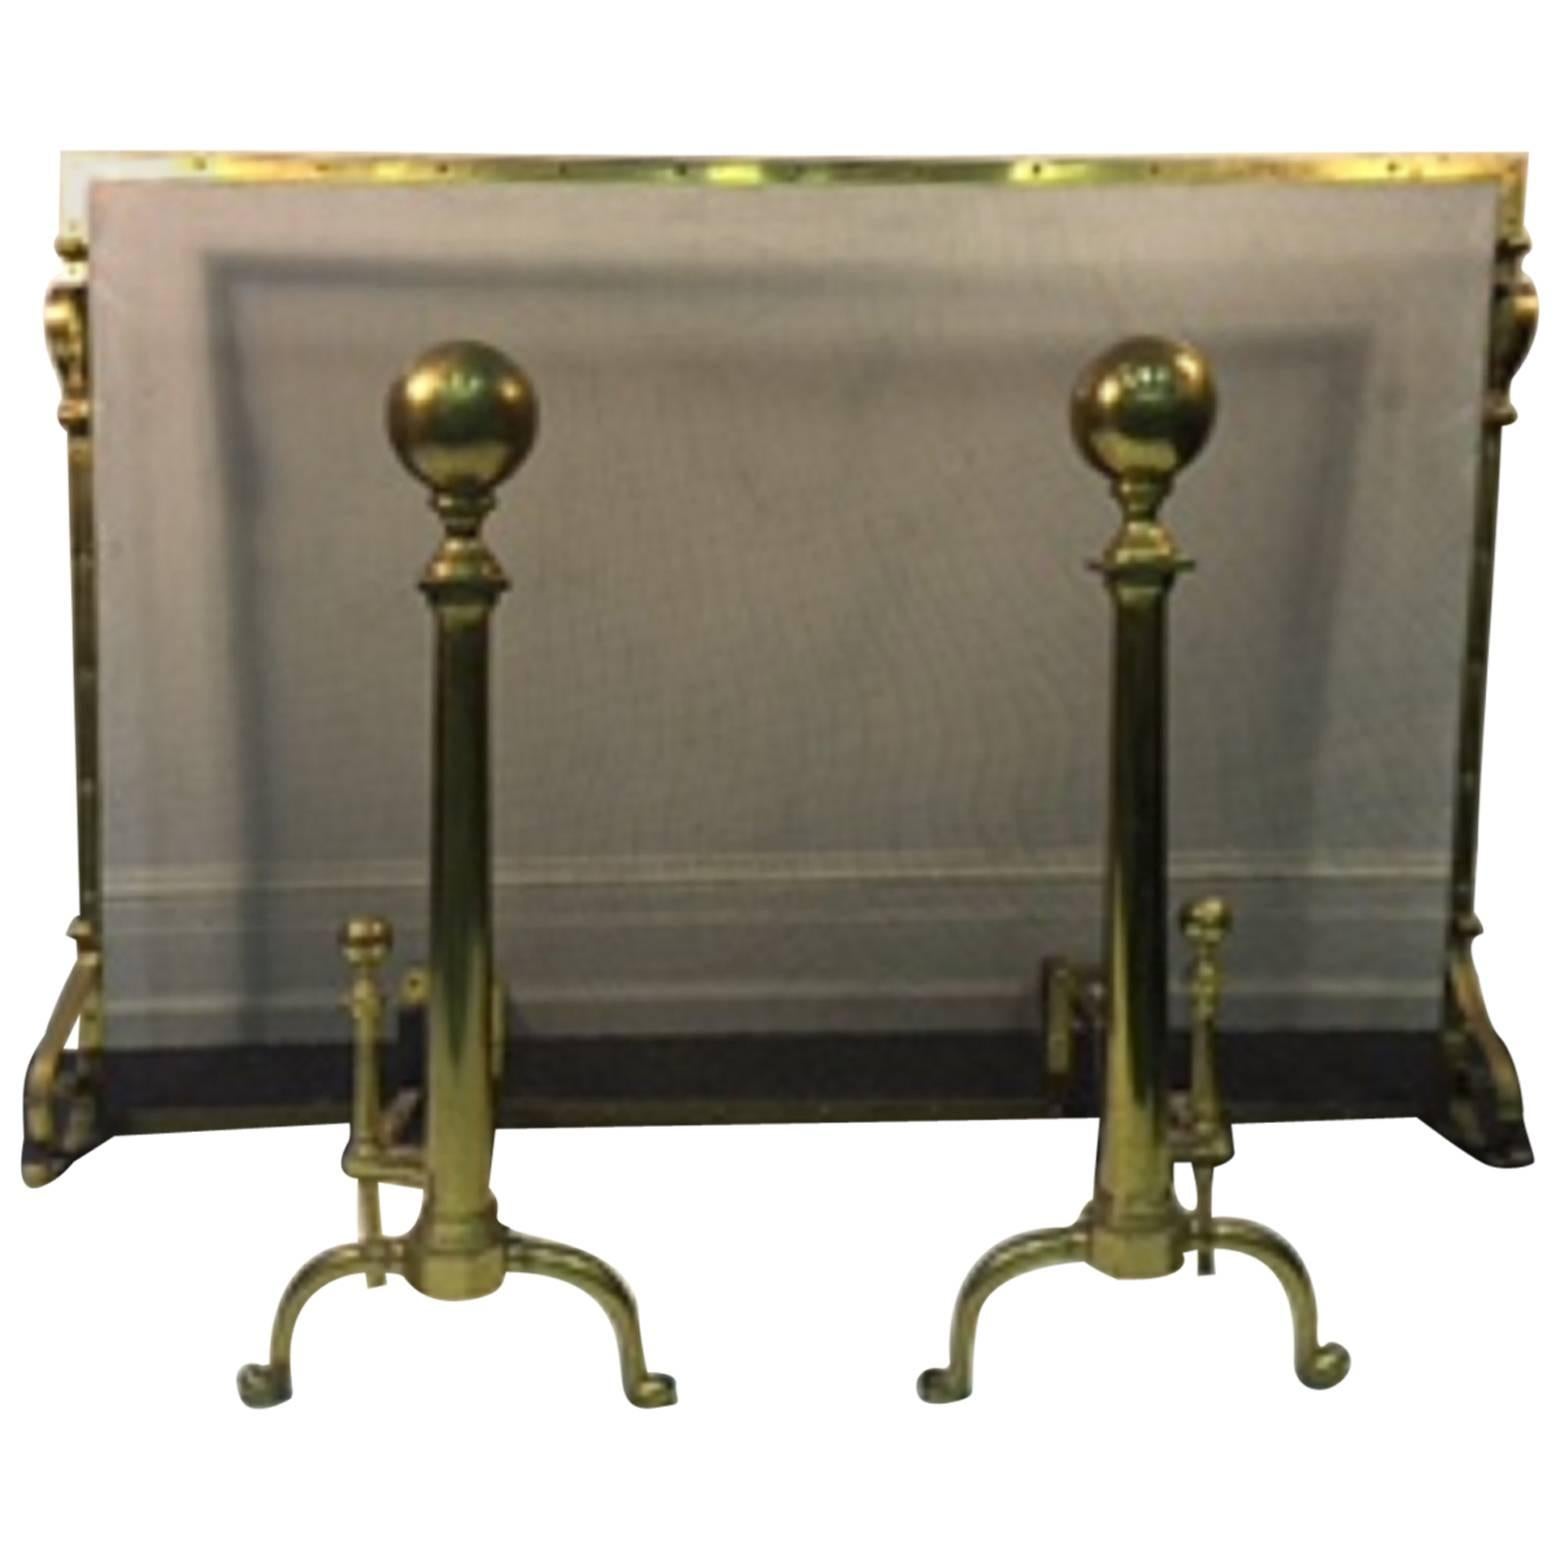 Exceptional Giant Brass Fireplace Screen with Andirons For Sale